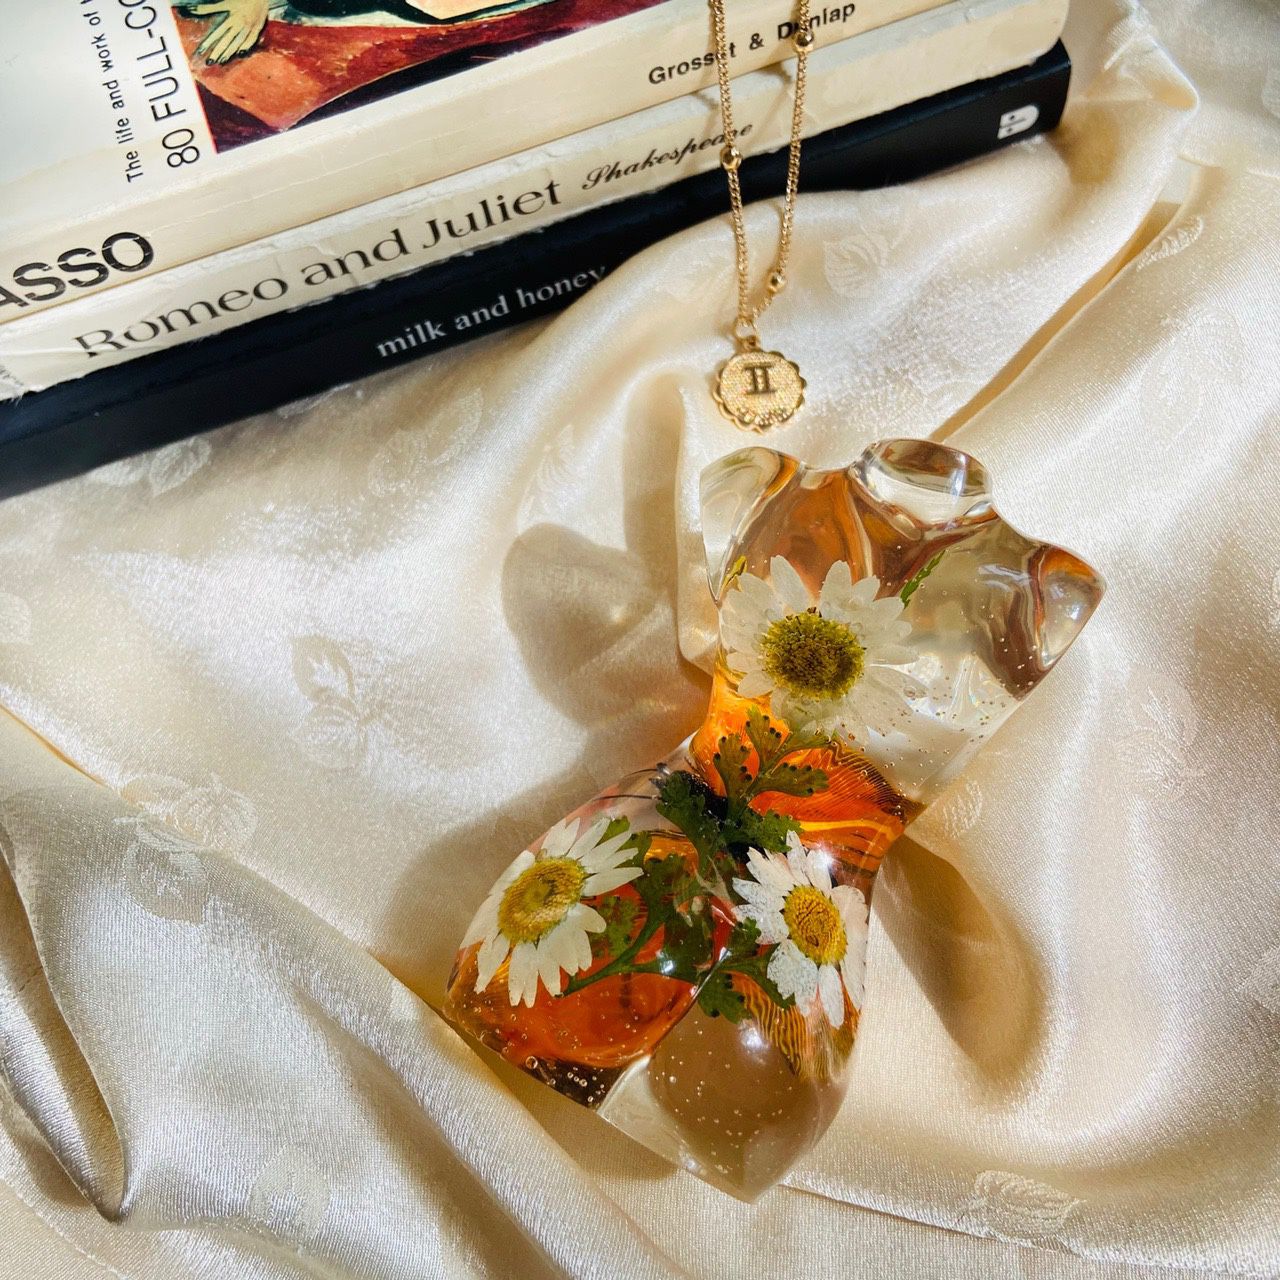 Handmade clear epoxy resin goddess figurine made with real dried pressed flowers & faux butterfly